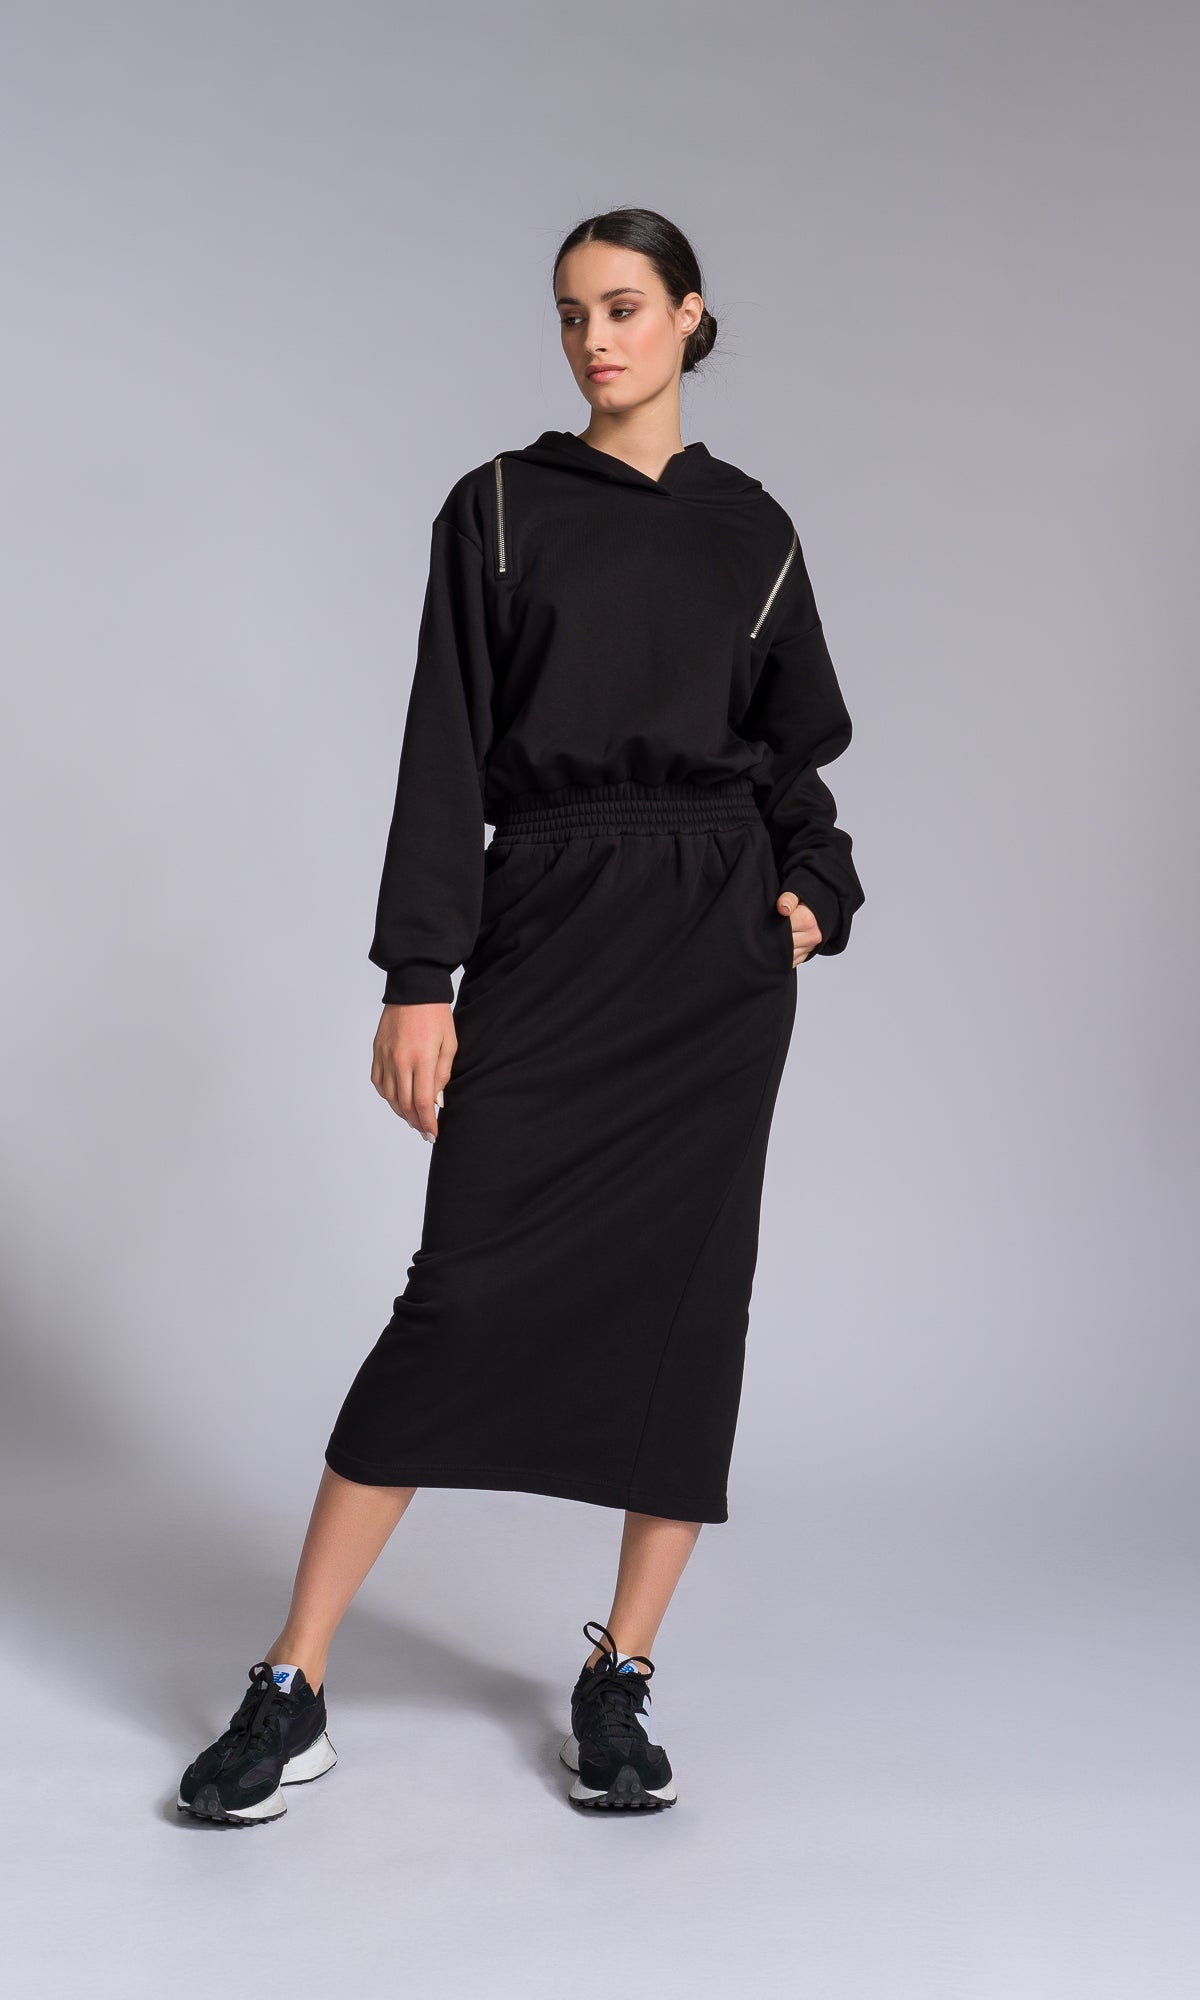 Hooded Cotton Dress with Zippered Shoulders